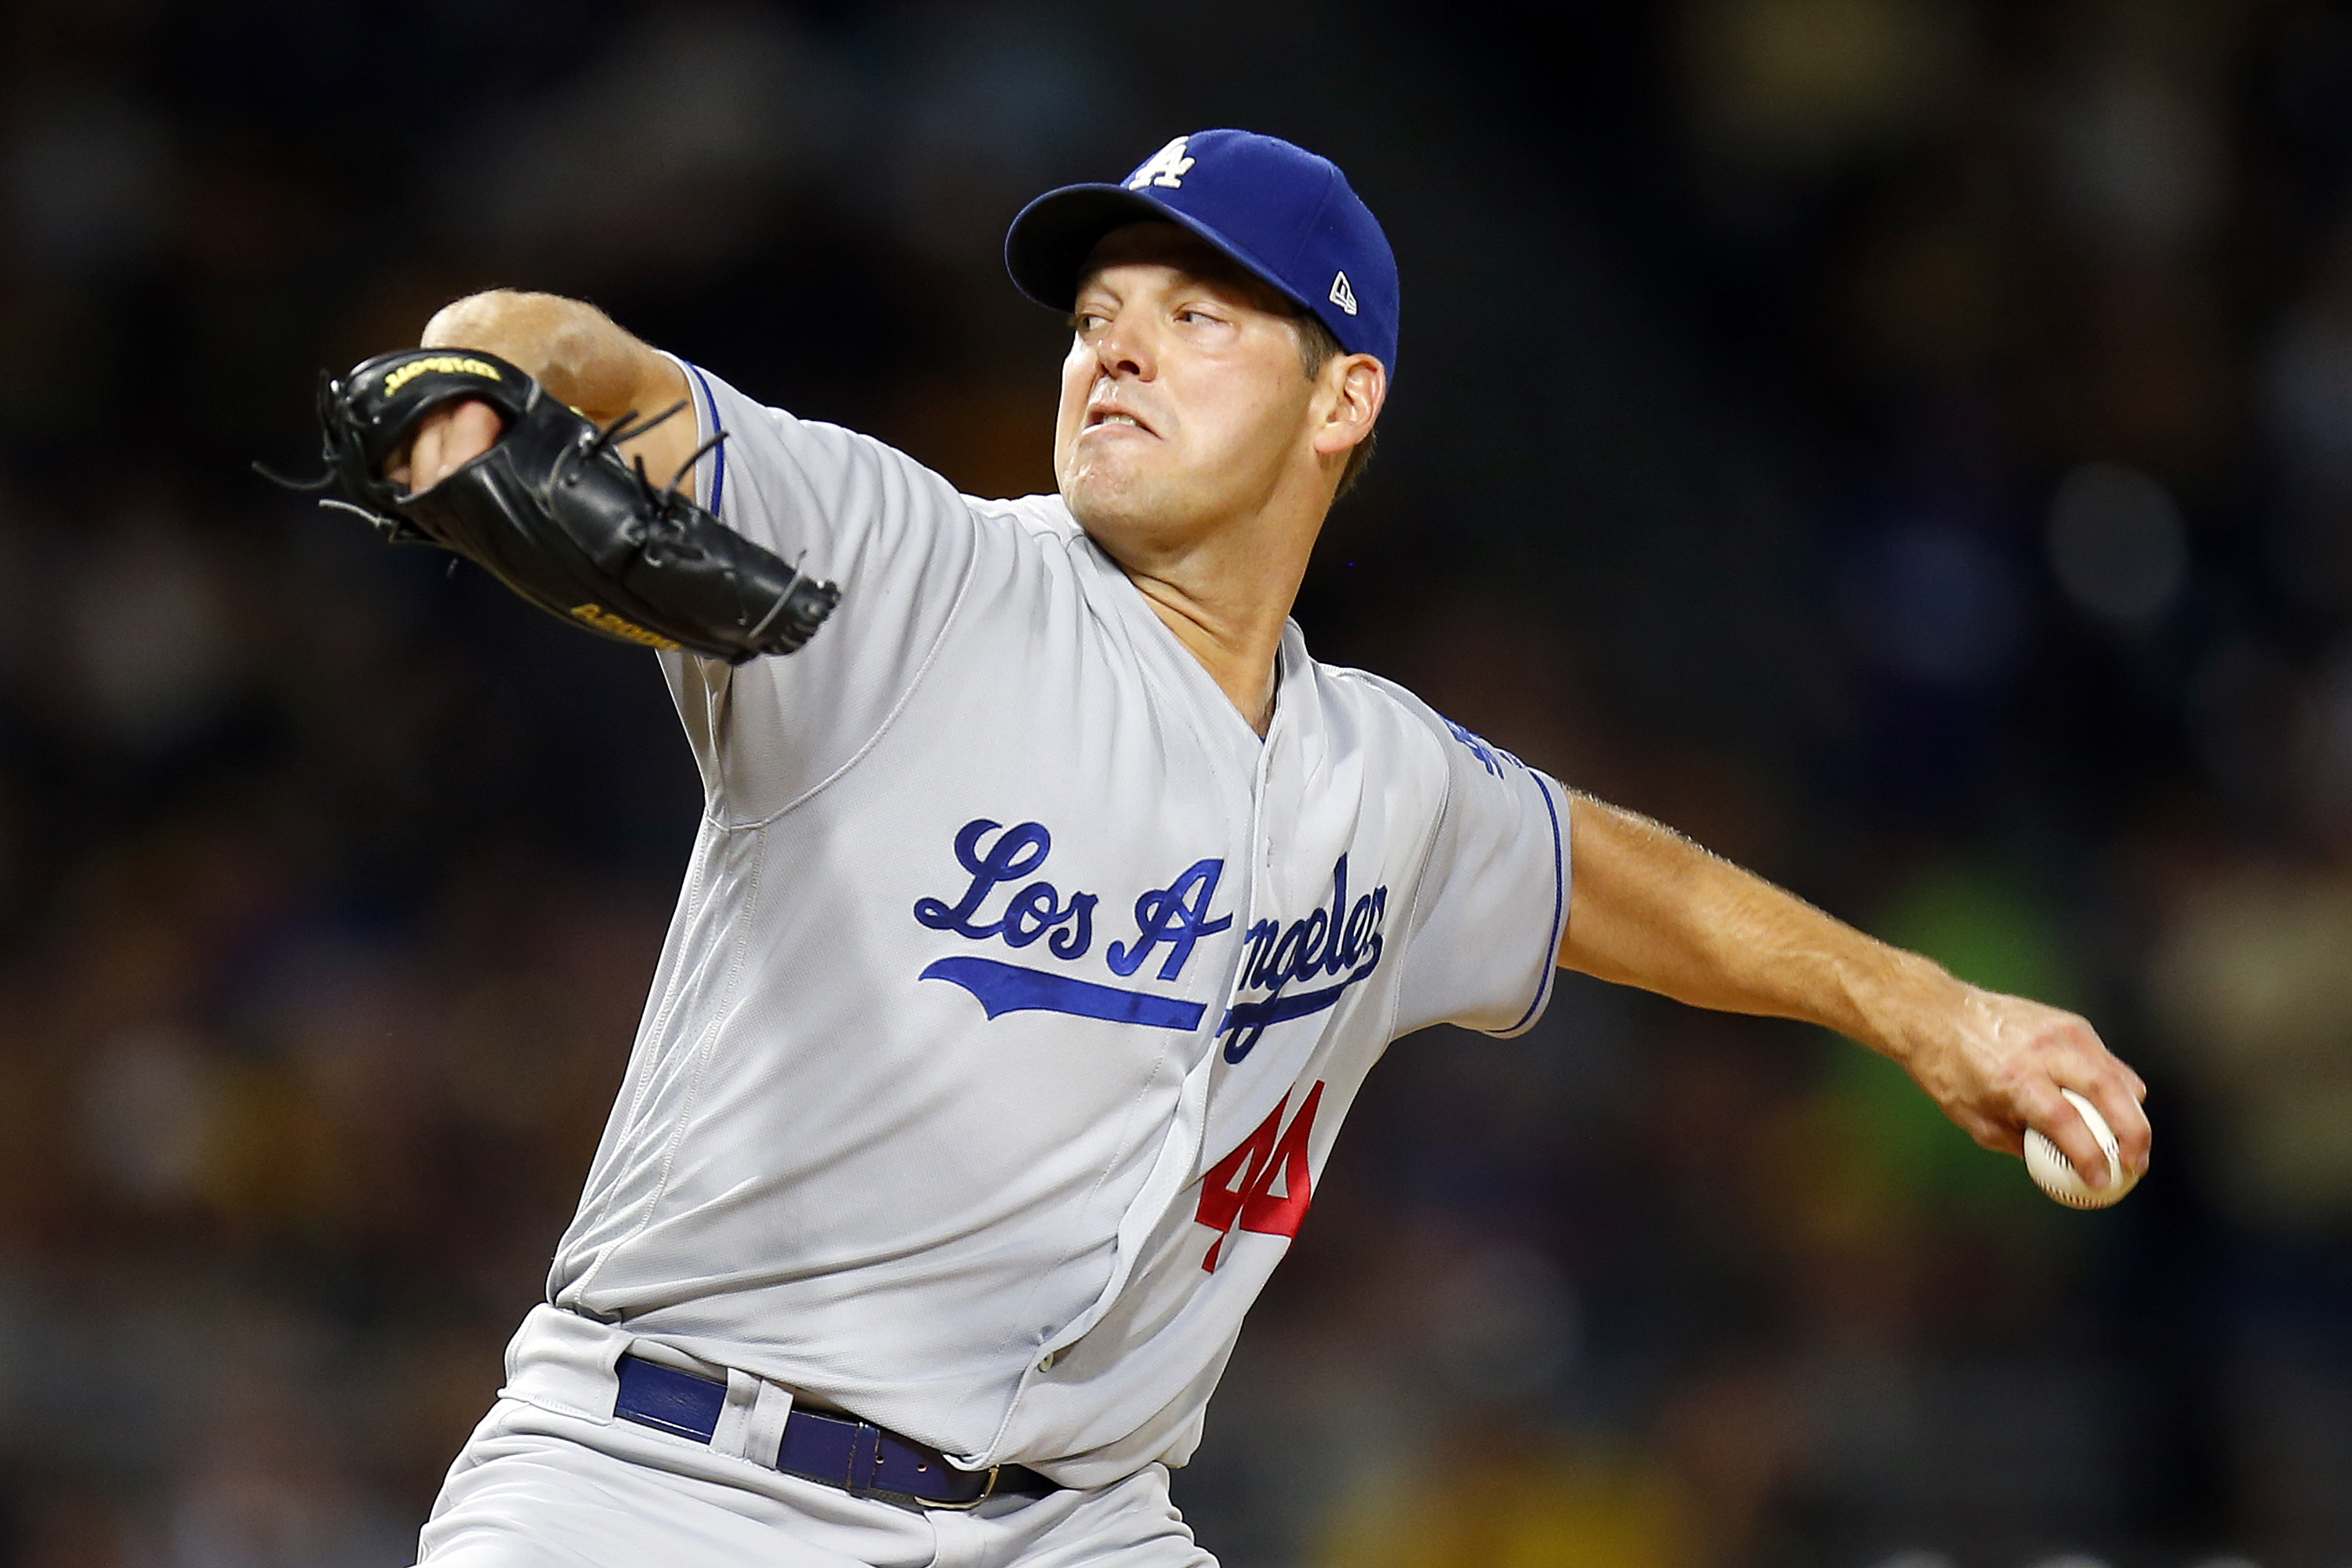 Rich Hill lost his no-hitter and the game in Pittsburgh